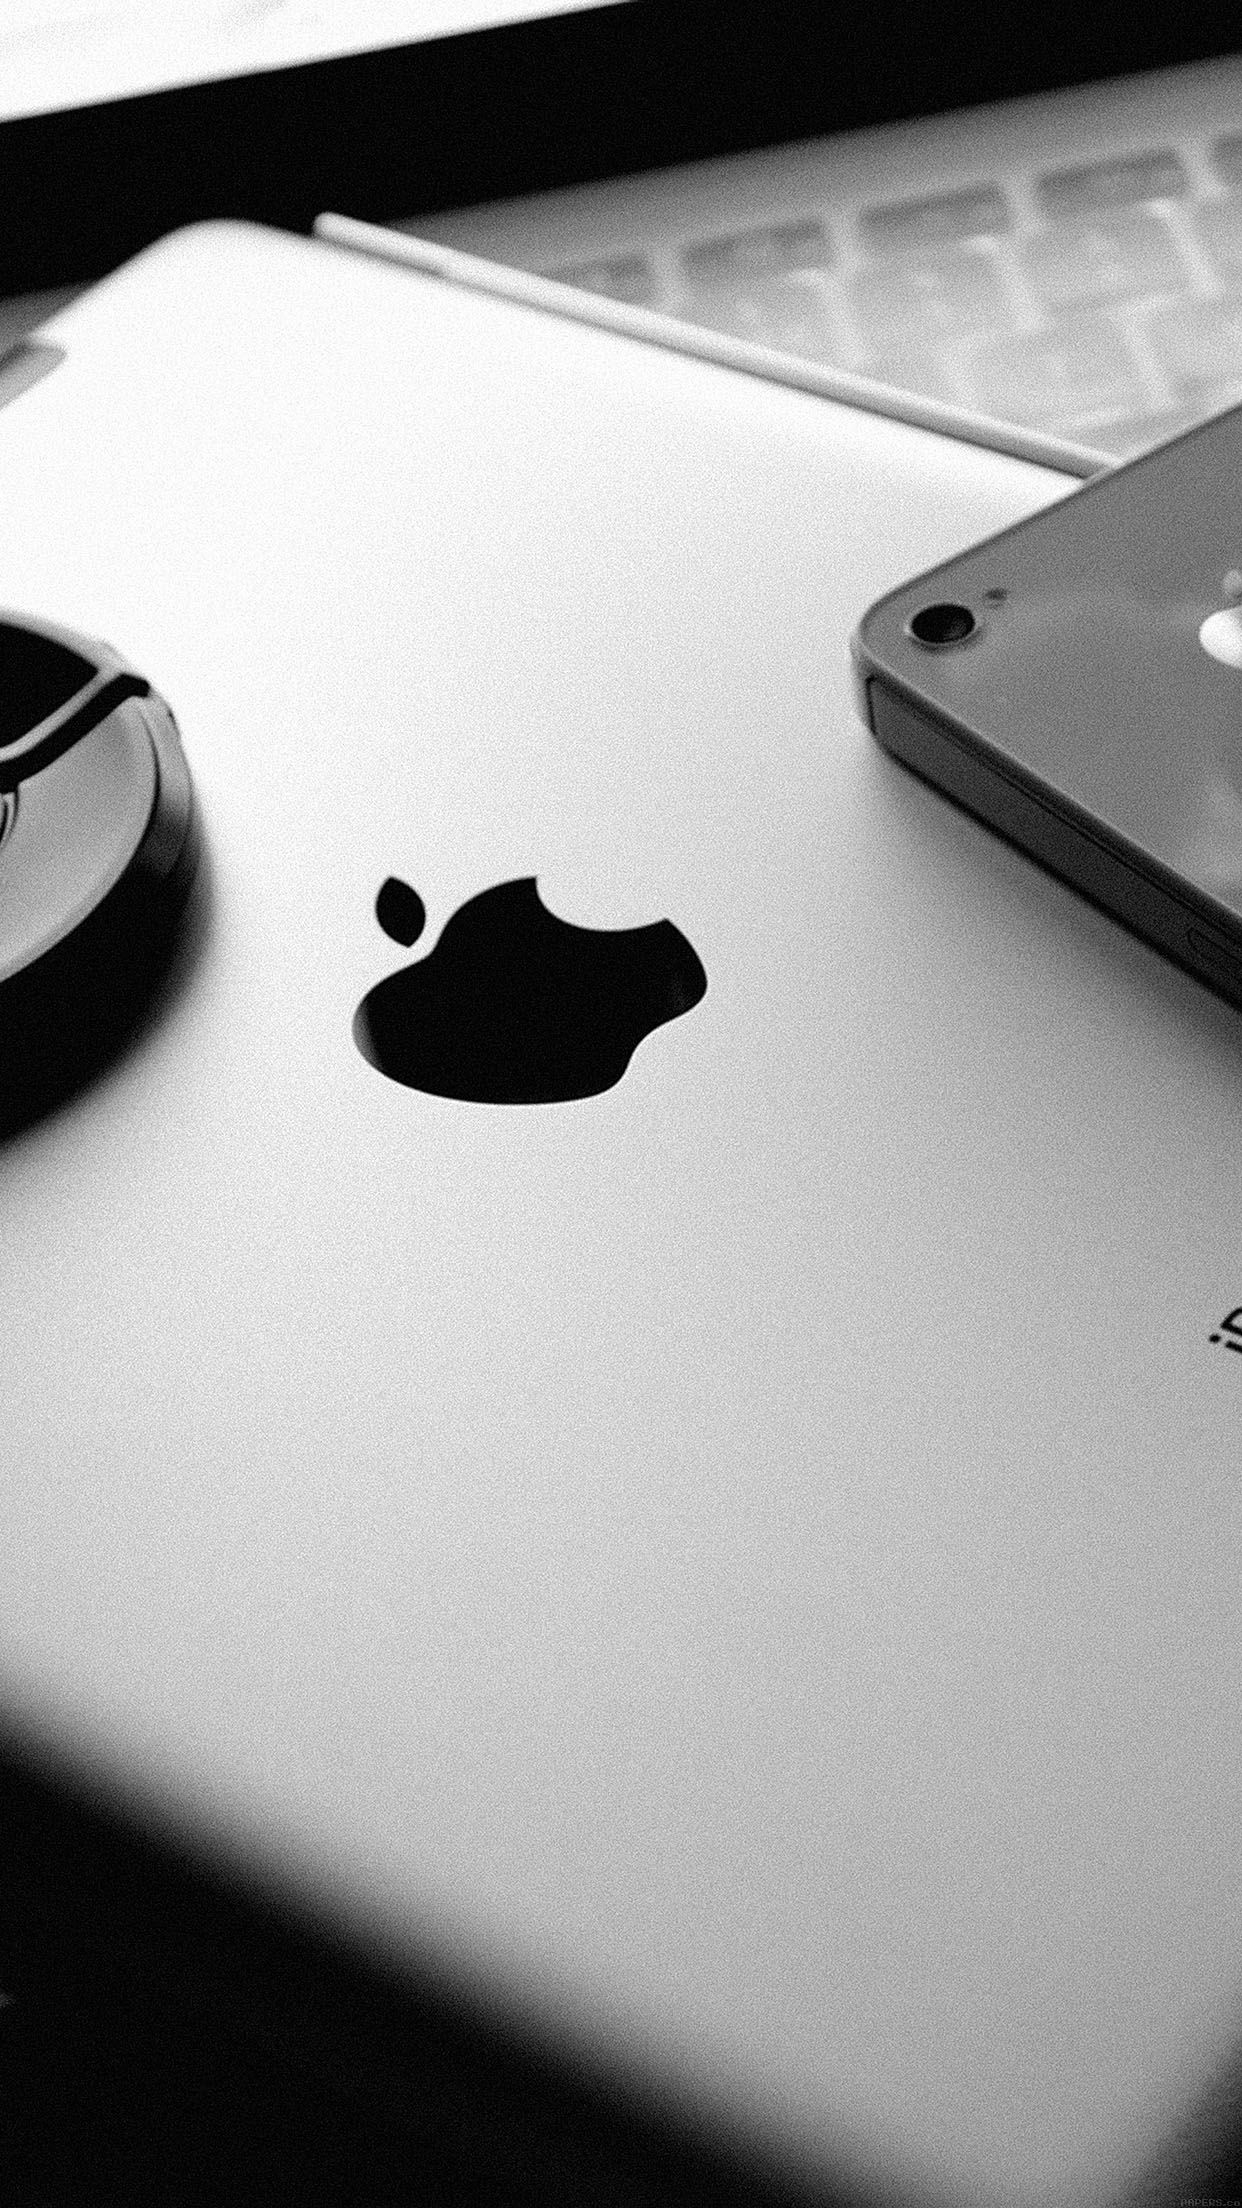 Apple Products Art Android wallpaper HD wallpaper